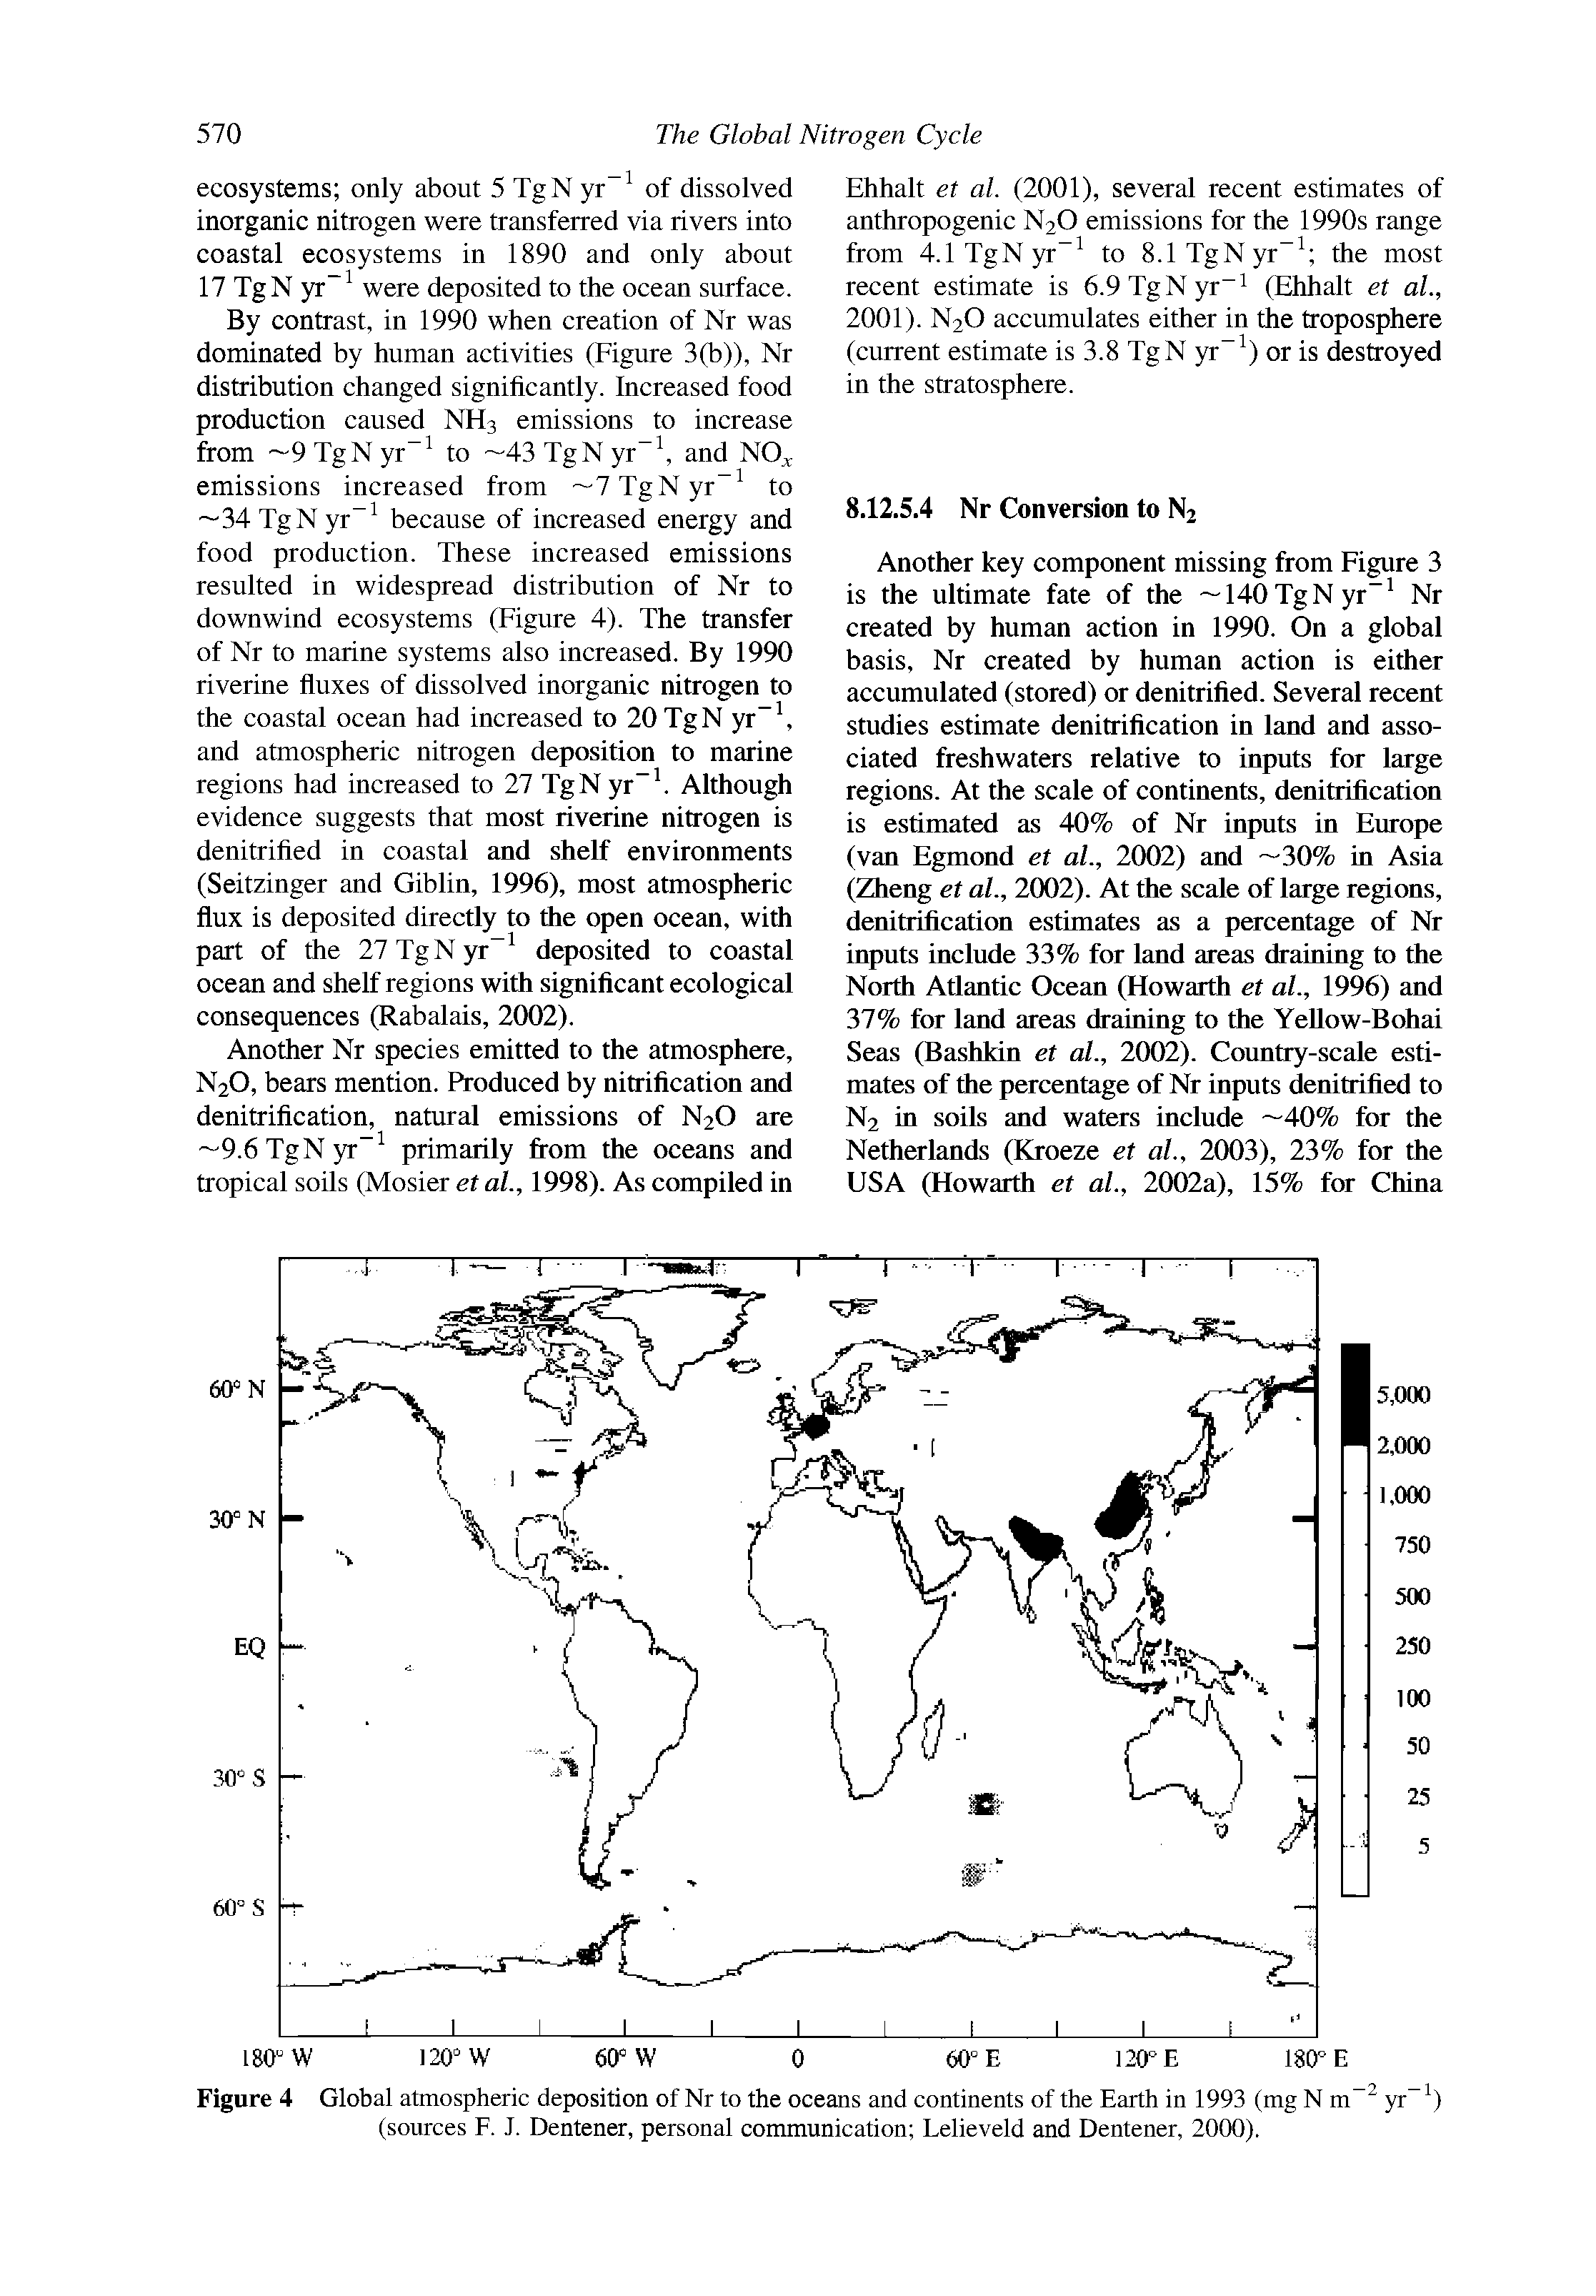 Figure 4 Global atmospheric deposition of Nr to the oceans and continents of the Earth in 1993 (mg N m yr (sources F. J. Dentener, personal communication Lelieveld and Dentener, 2000).